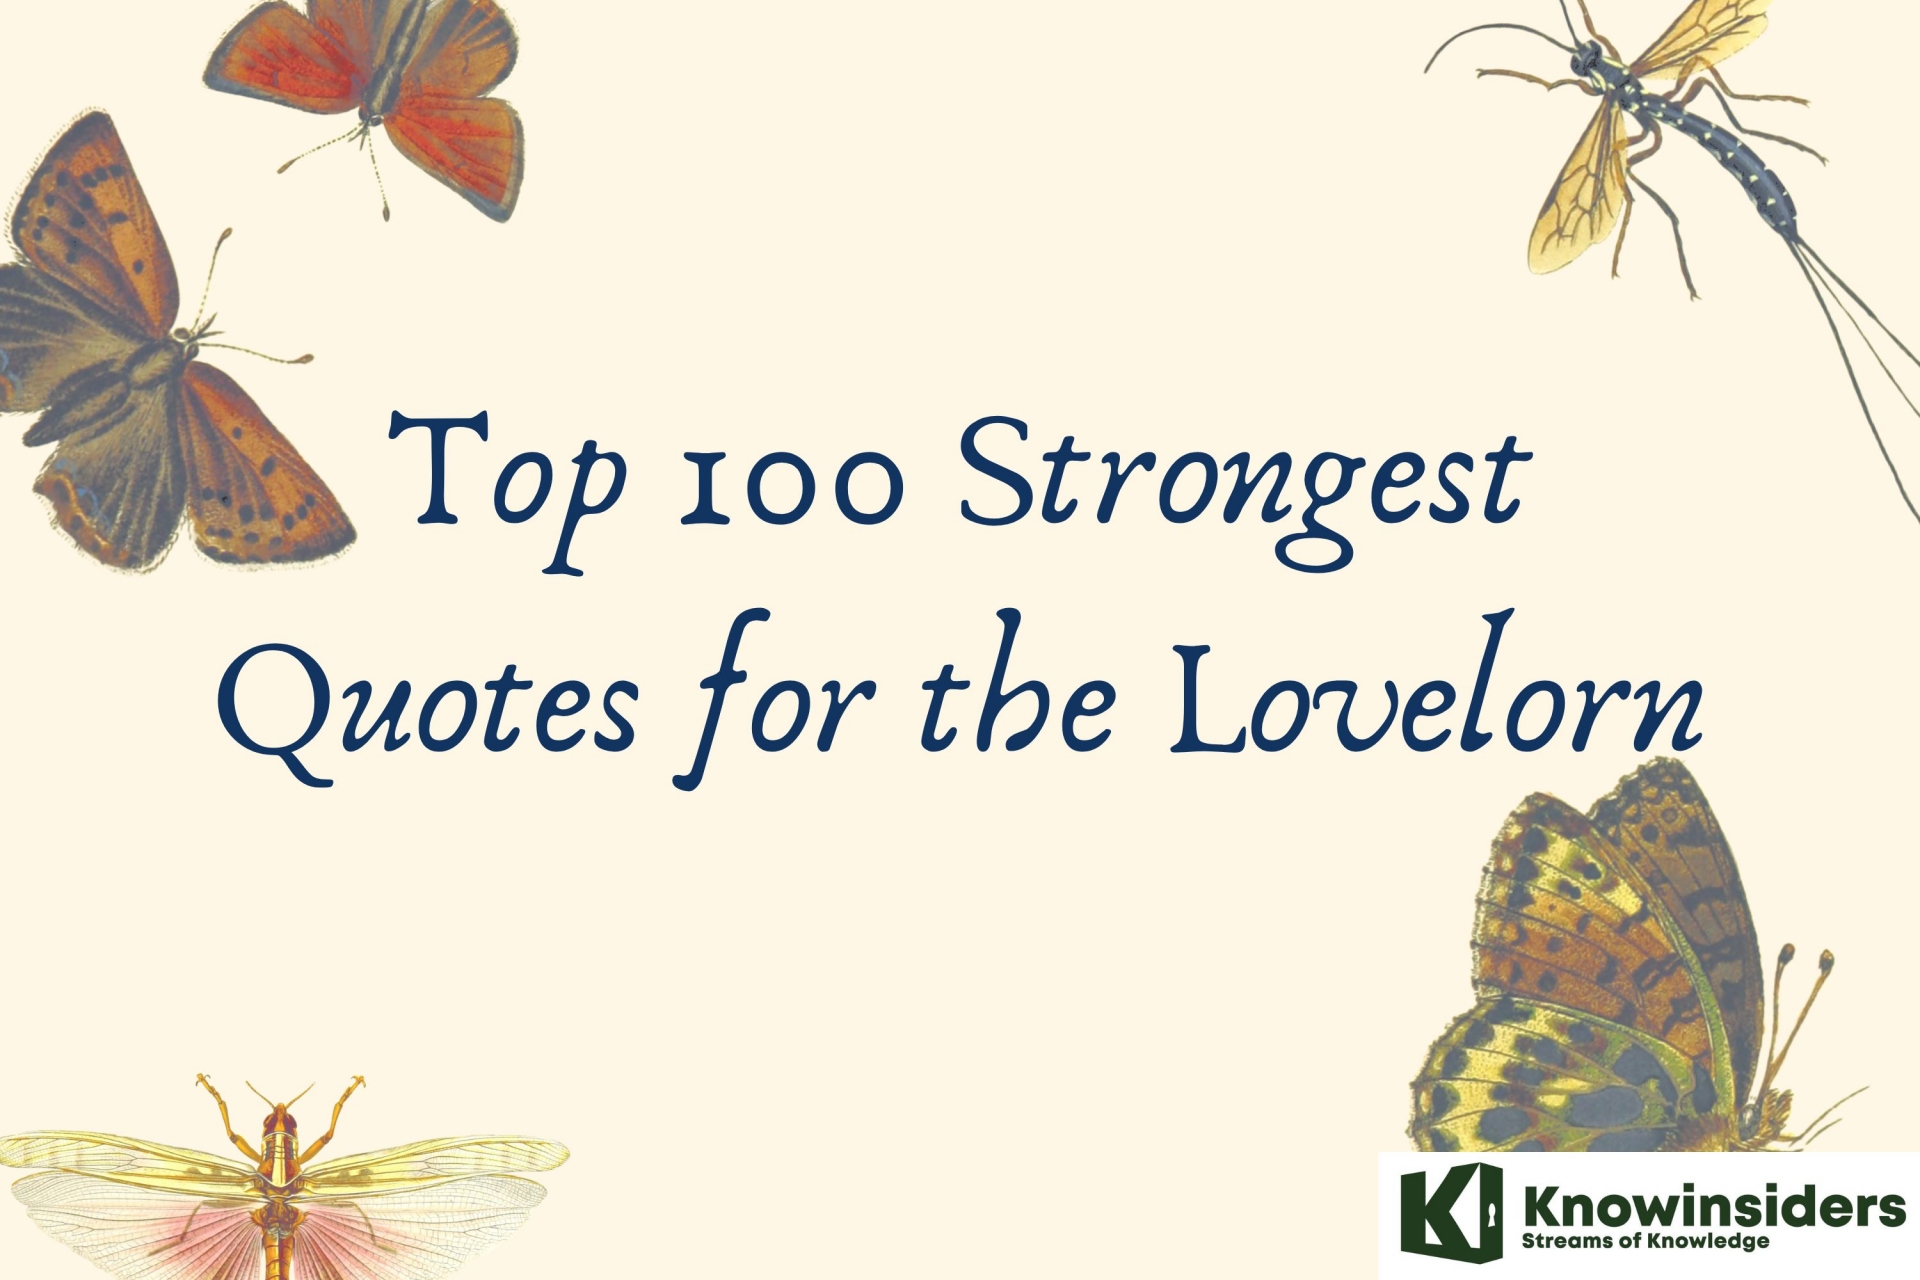 Top 100 Strongest Quotes for the Lovelorn